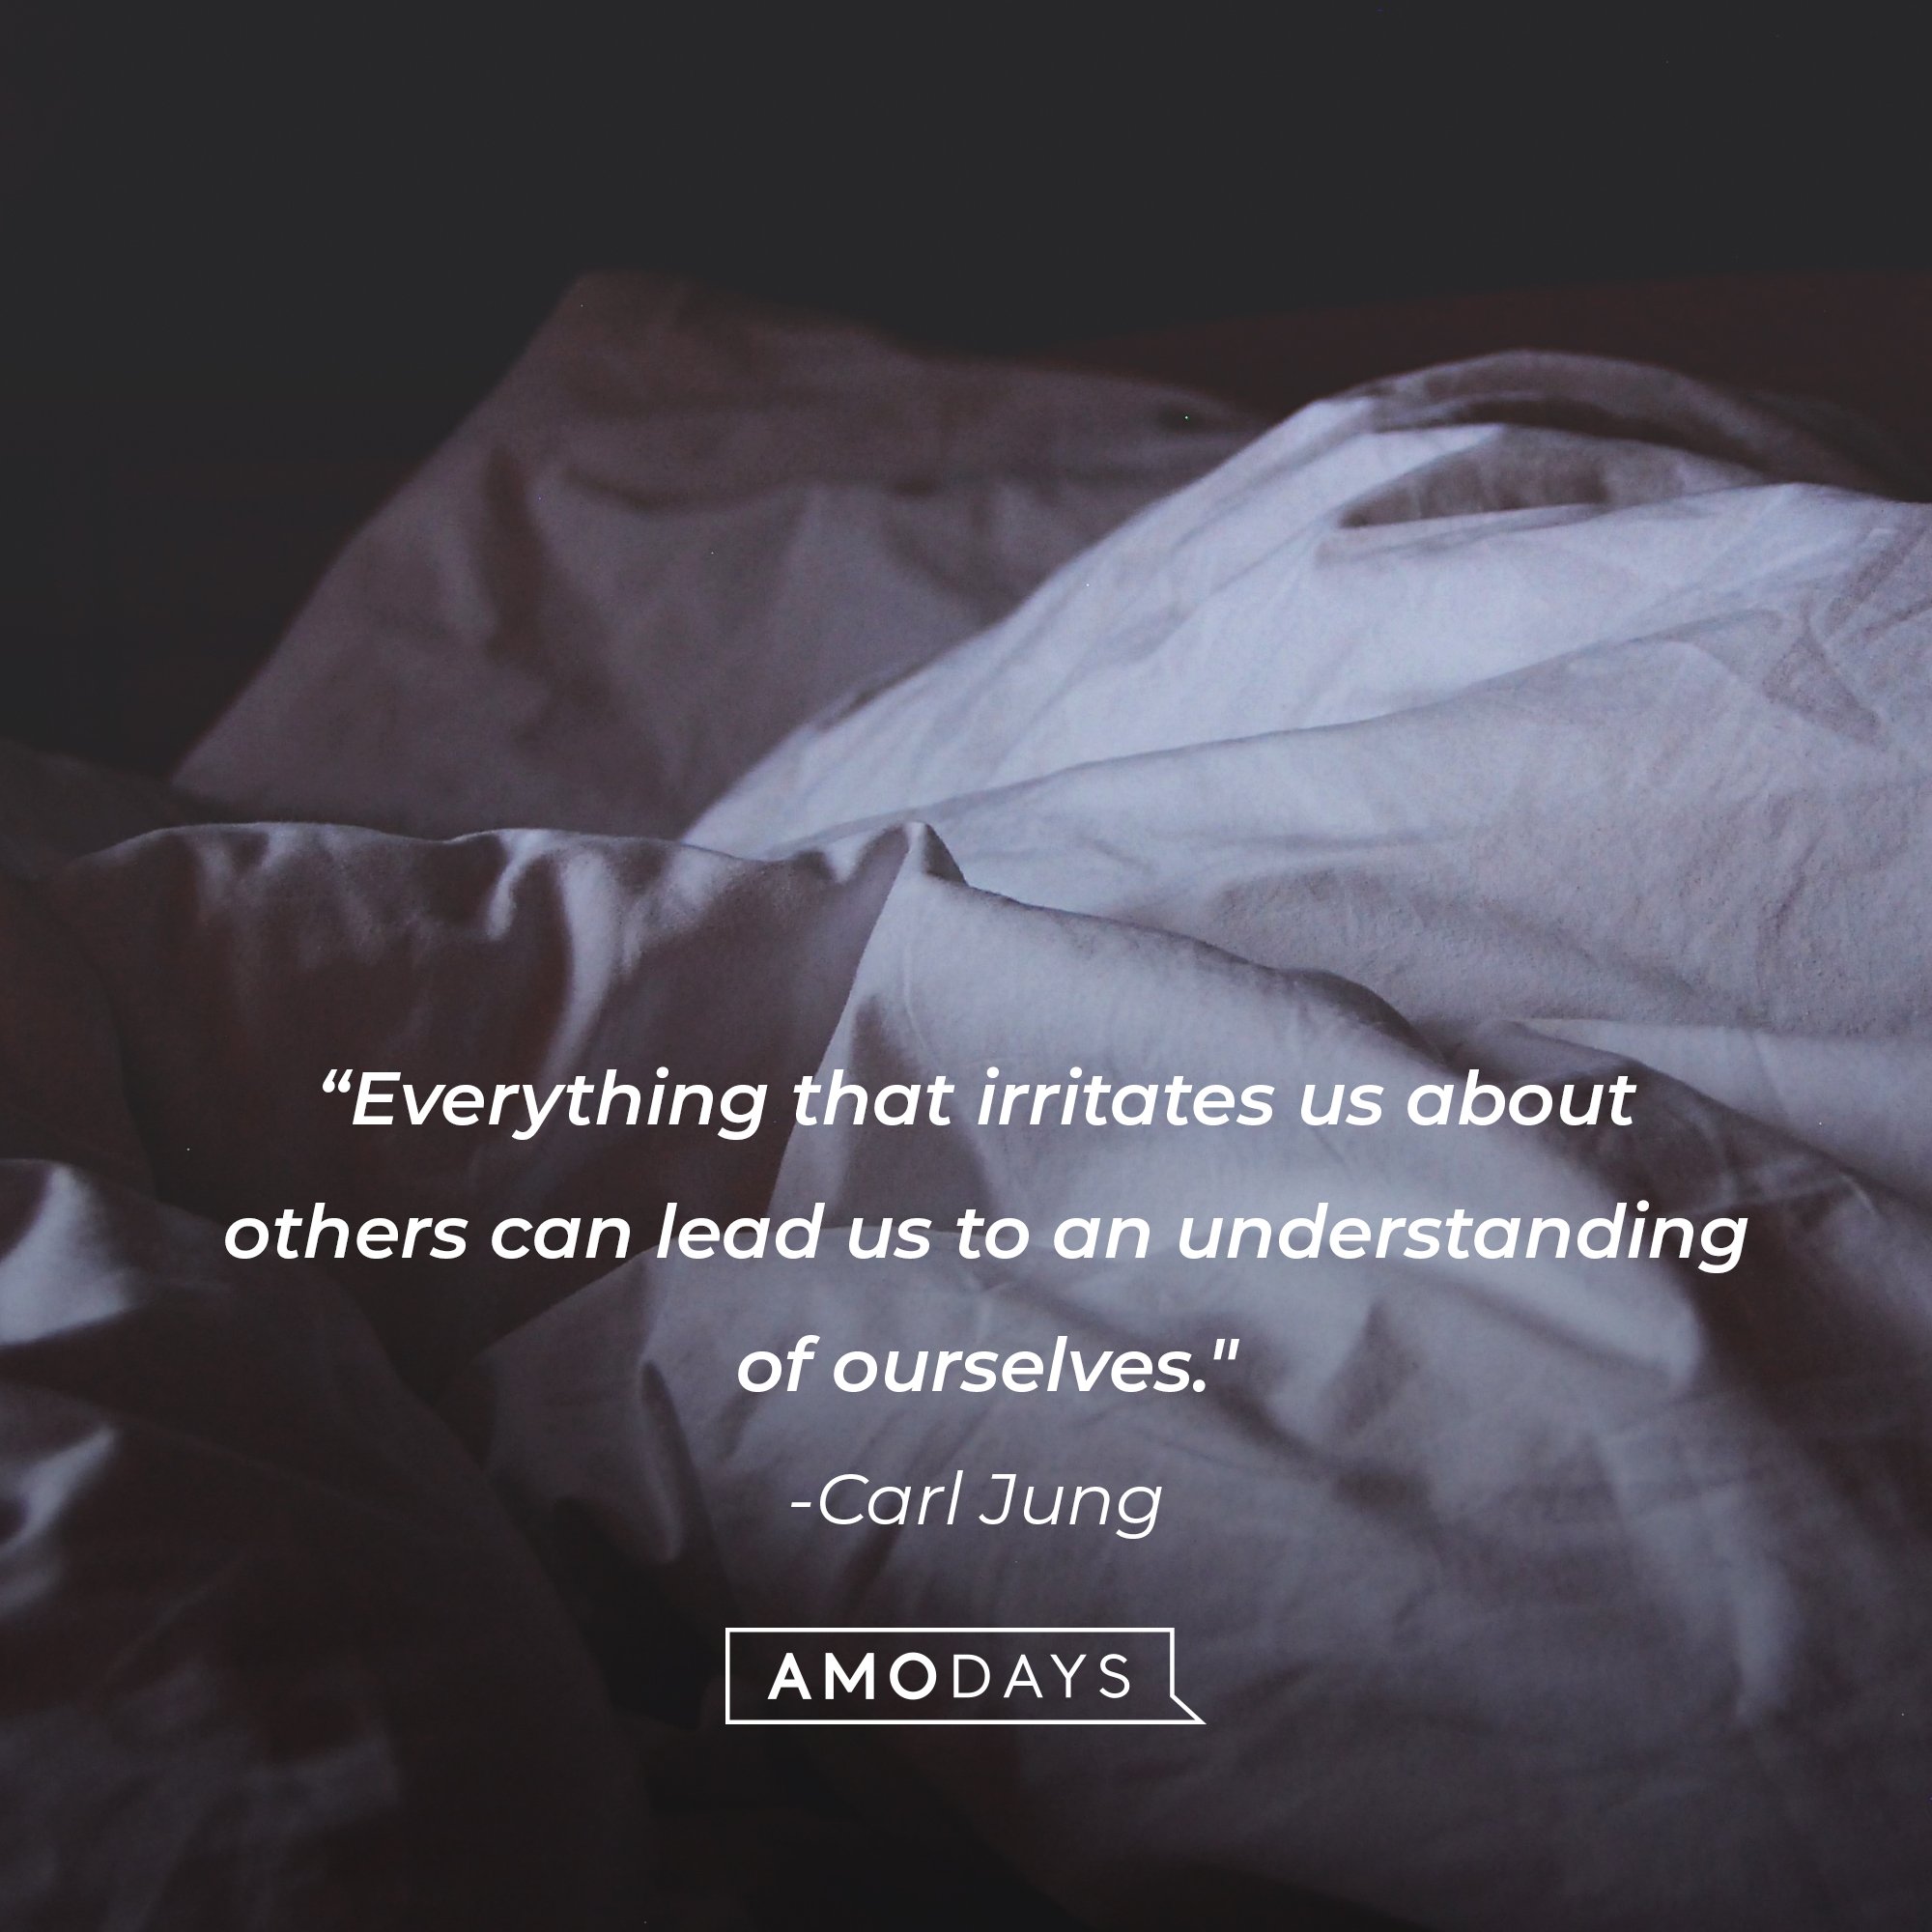 Carl Jung’s quote: “Everything that irritates us about others can lead us to an understanding of ourselves." | Image: AmoDays 